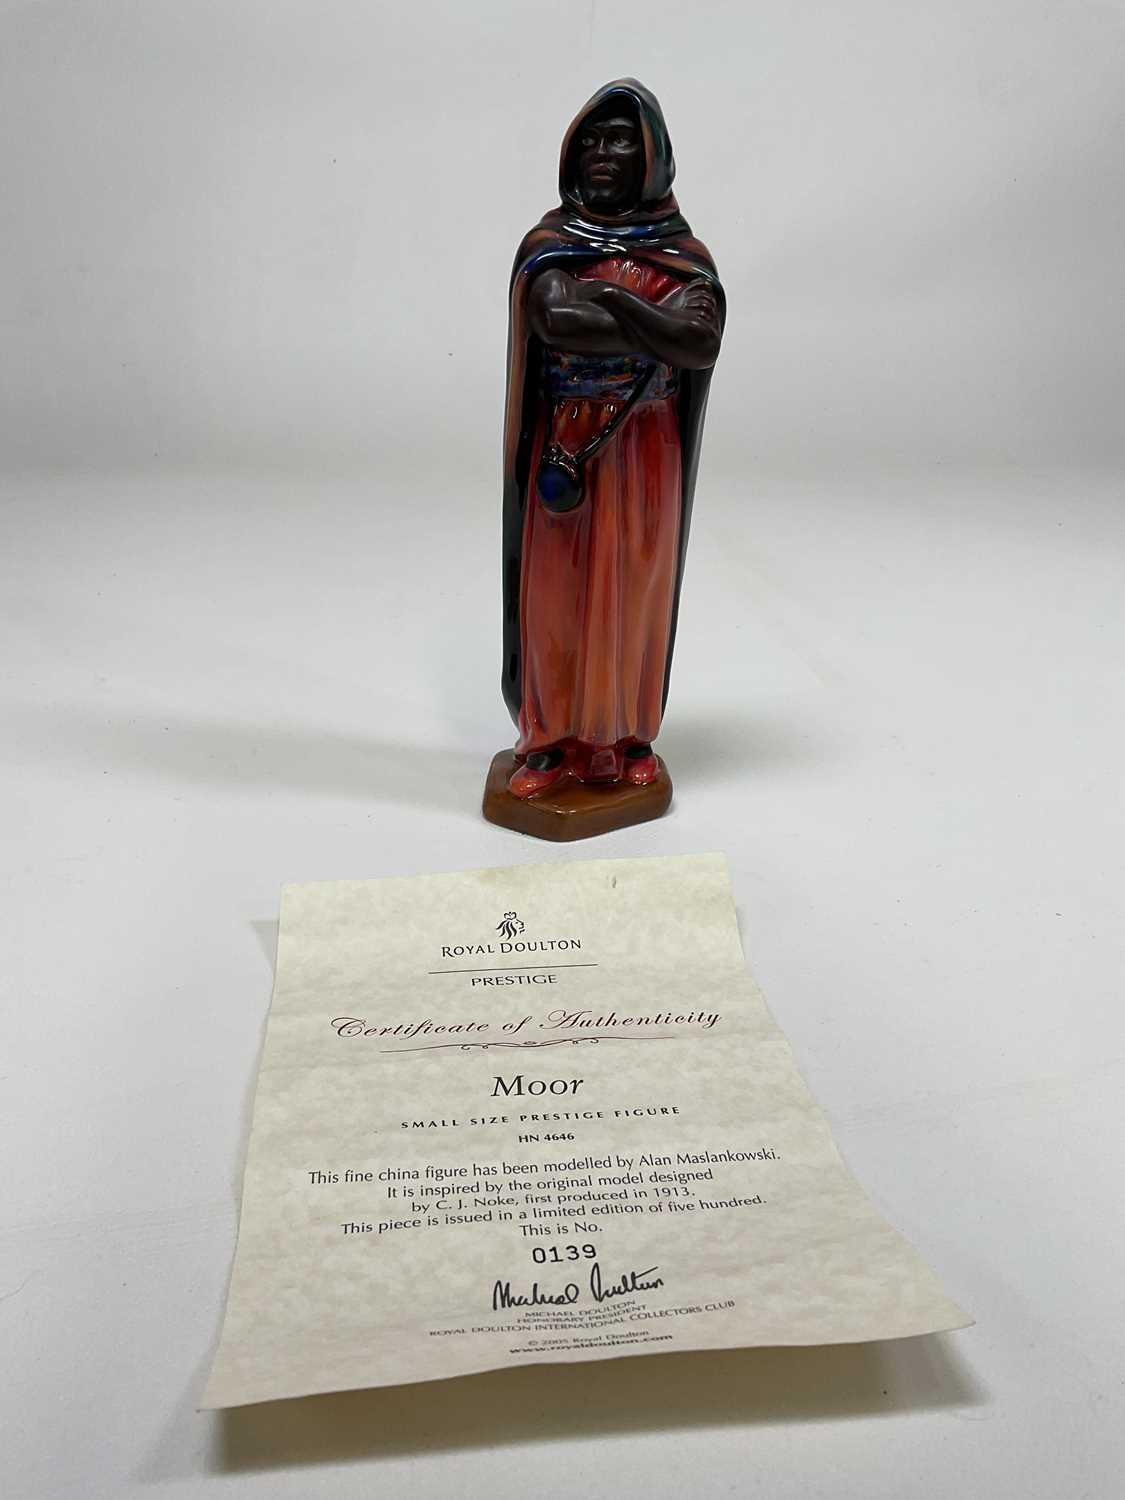 ROYAL DOULTON; prestige 'Moor' figure, HN4646 with certificate, limited Edition 139 of 500, height